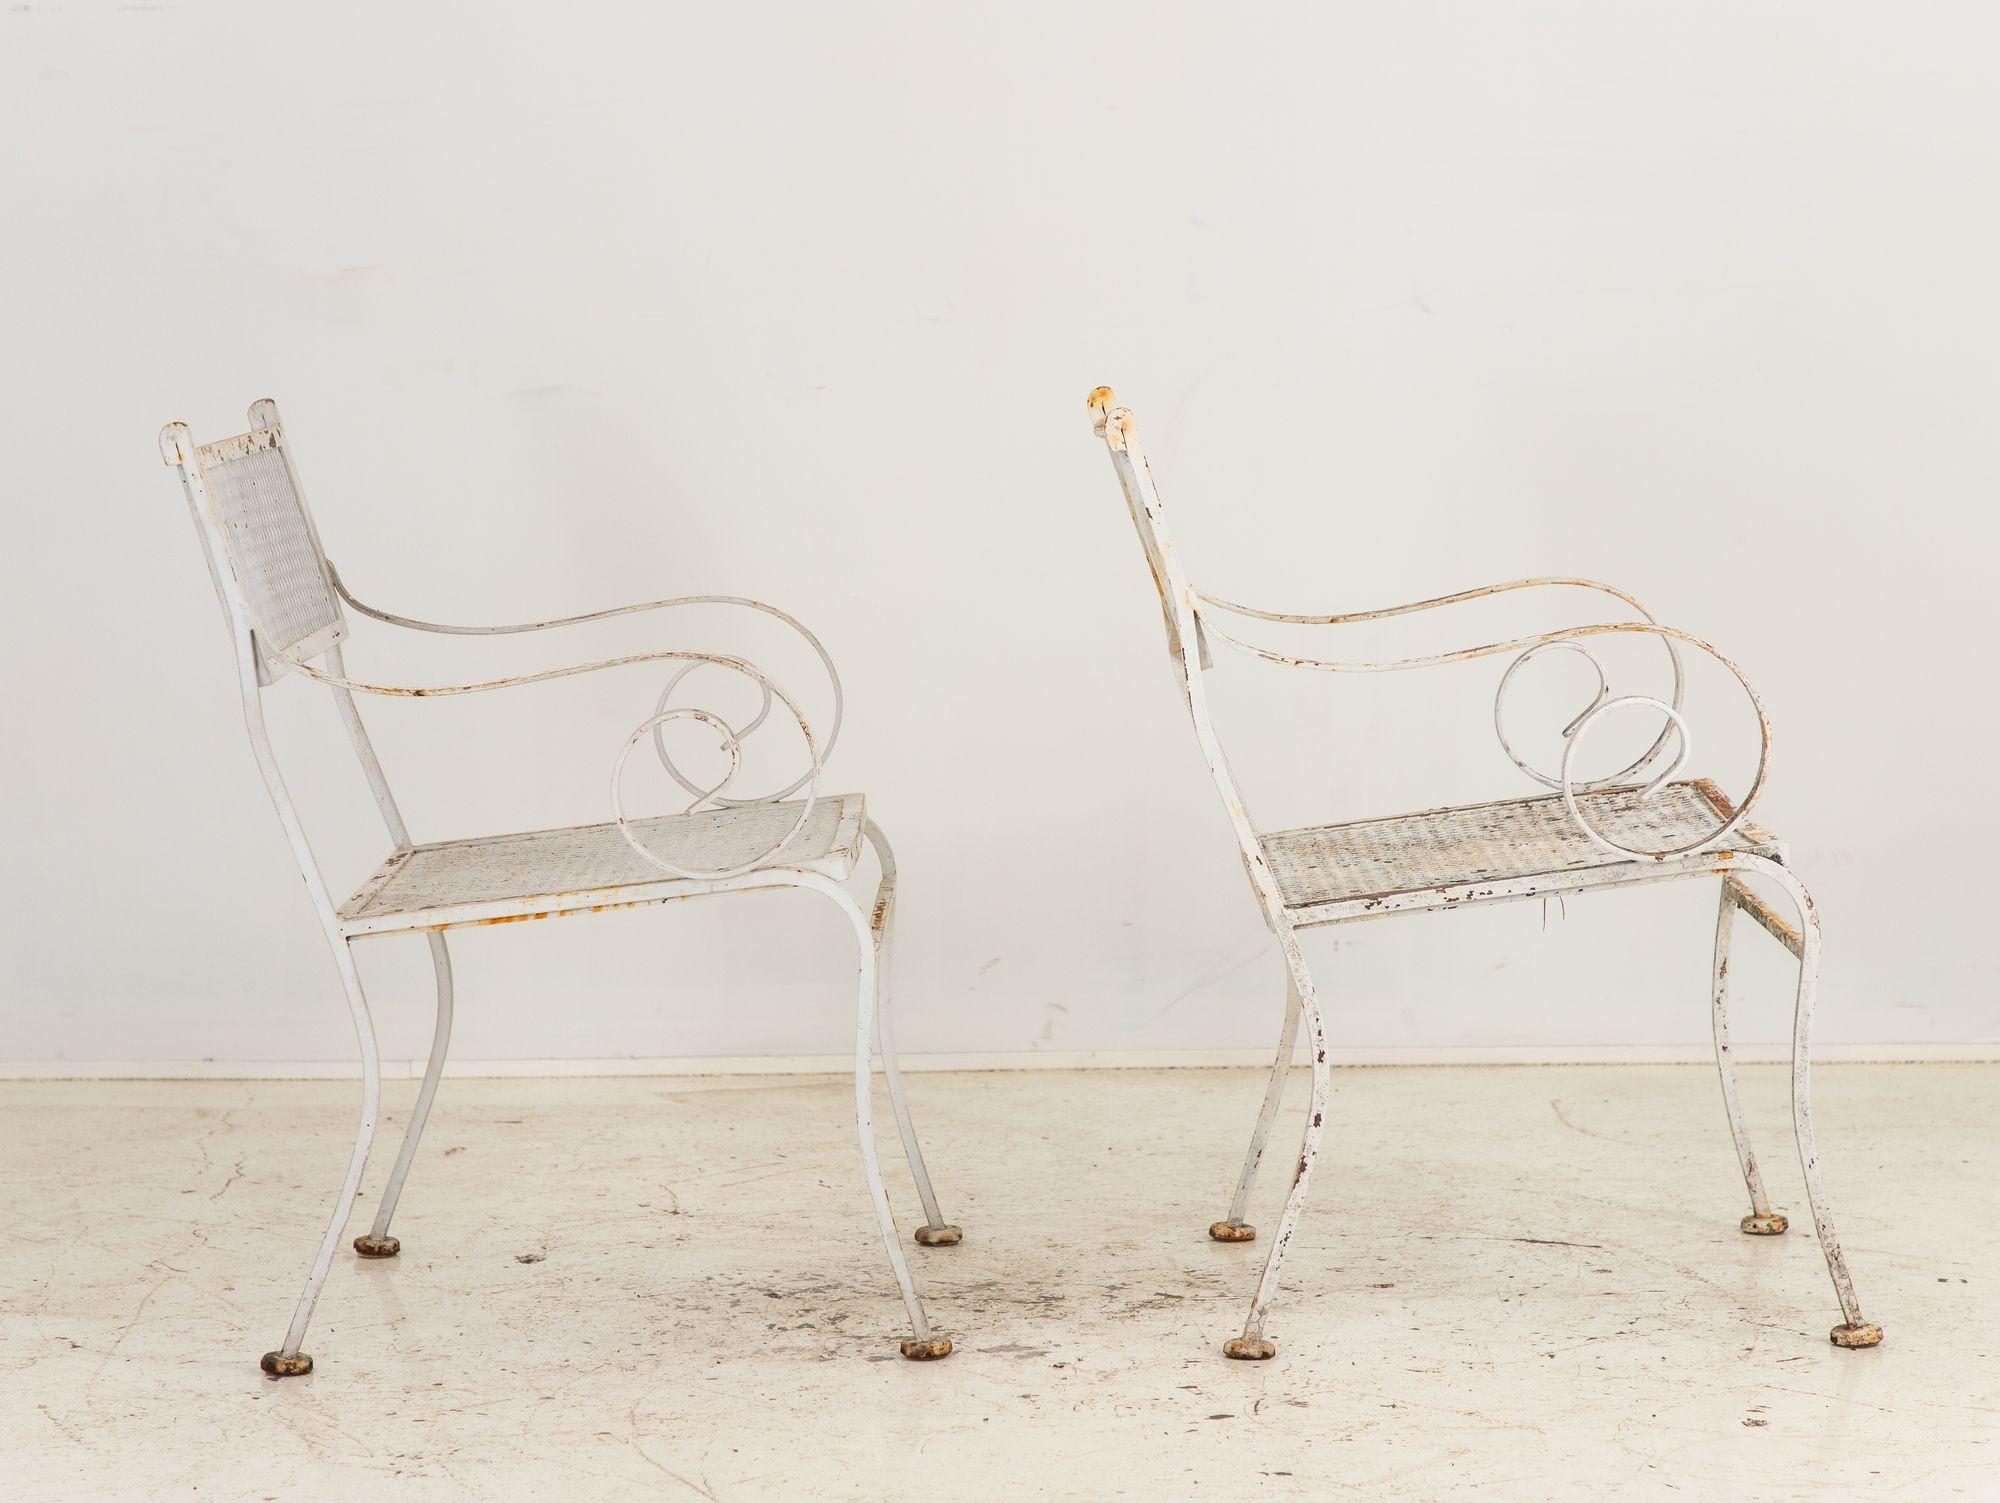 Pair White Painted Metal Garden Chairs, American mid 20th Century For Sale 8